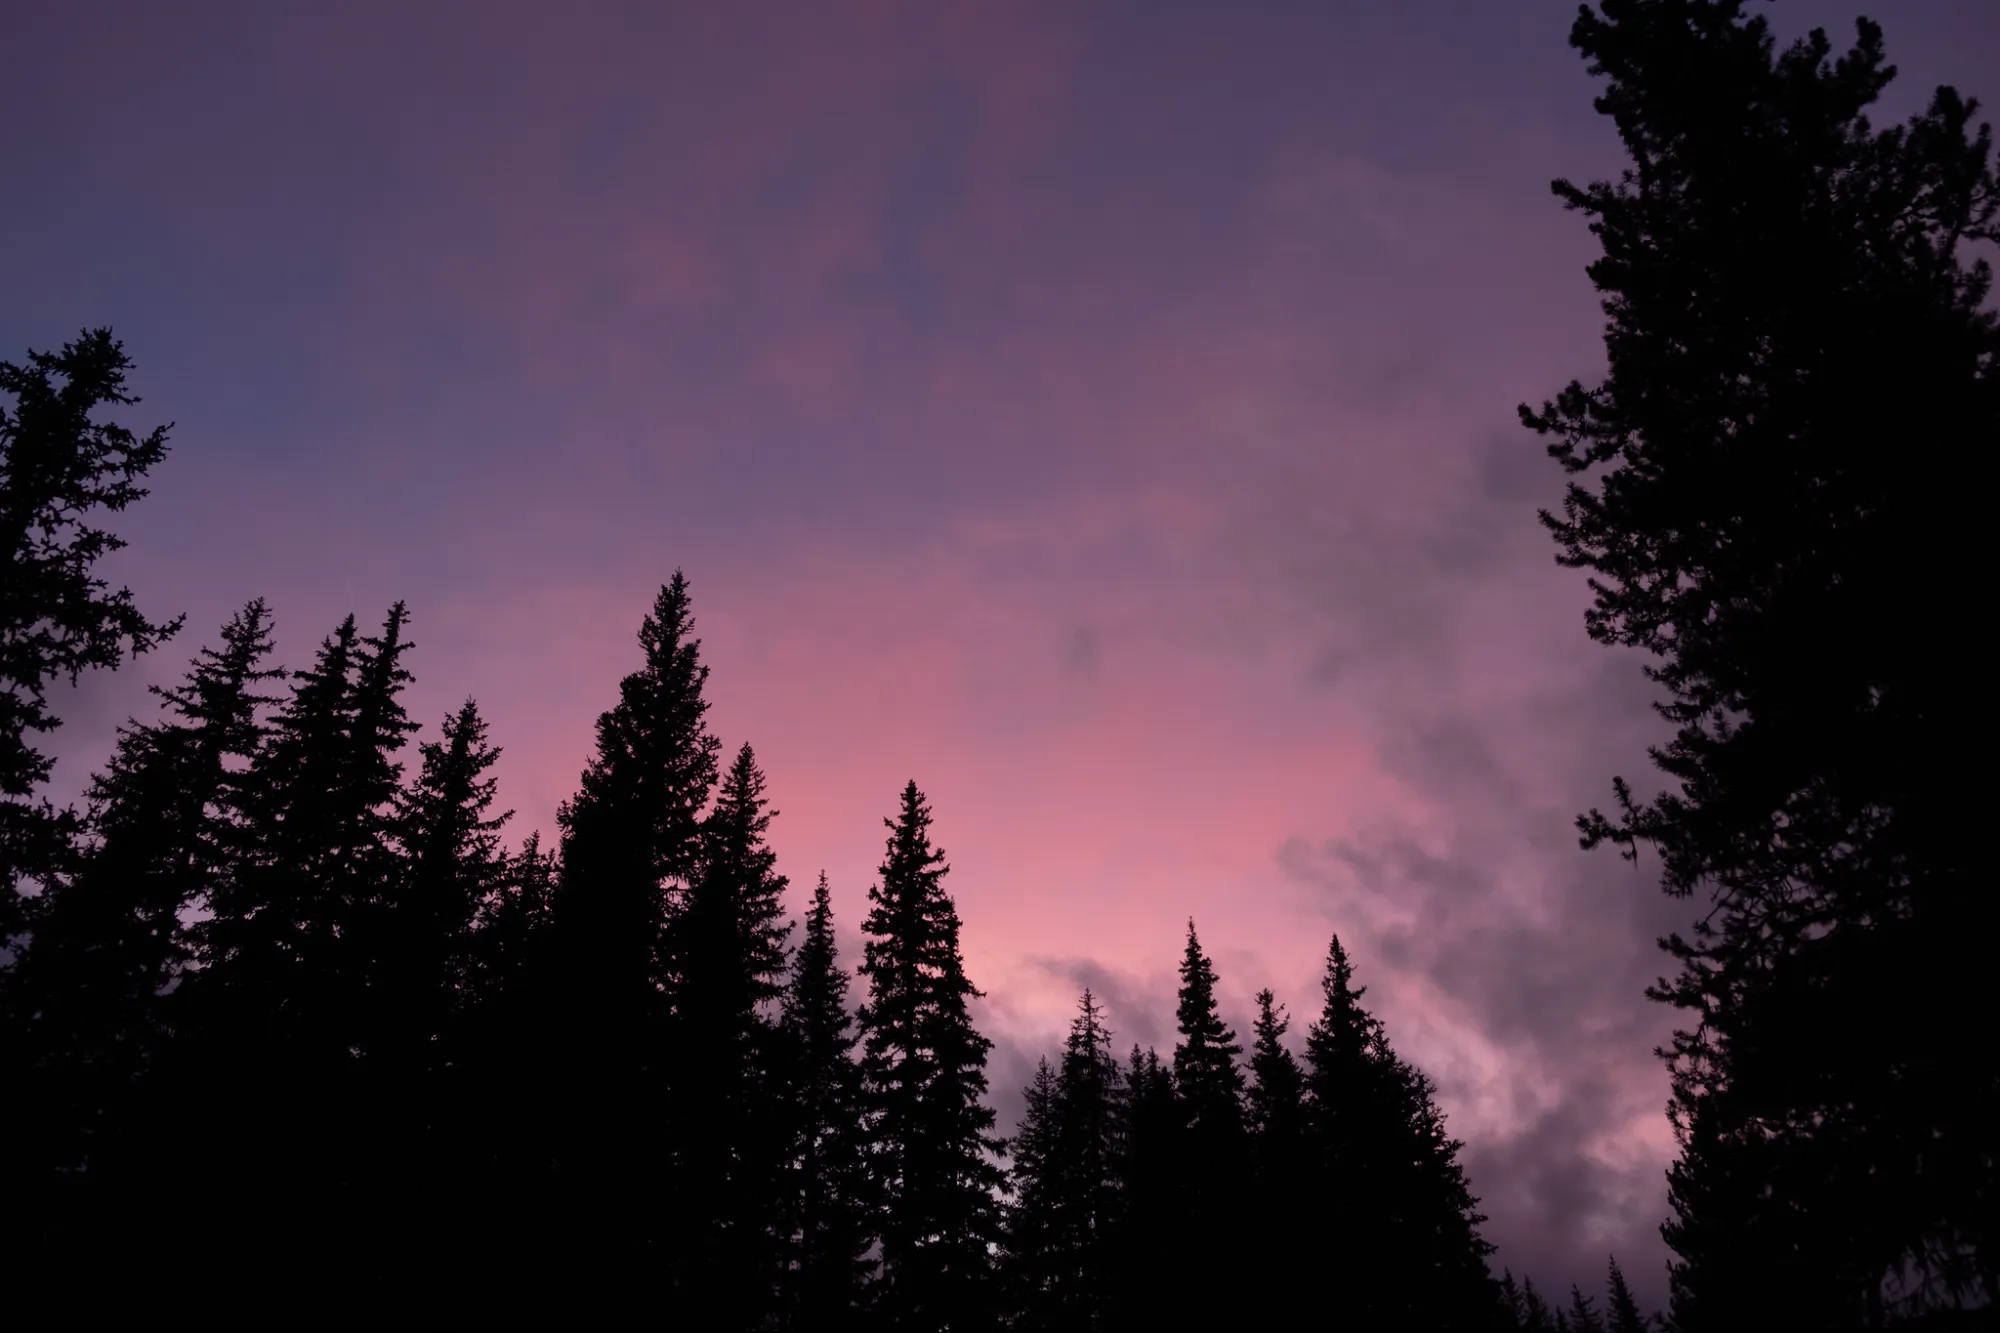 Pink and purple sky, silhouetted evergreen trees.